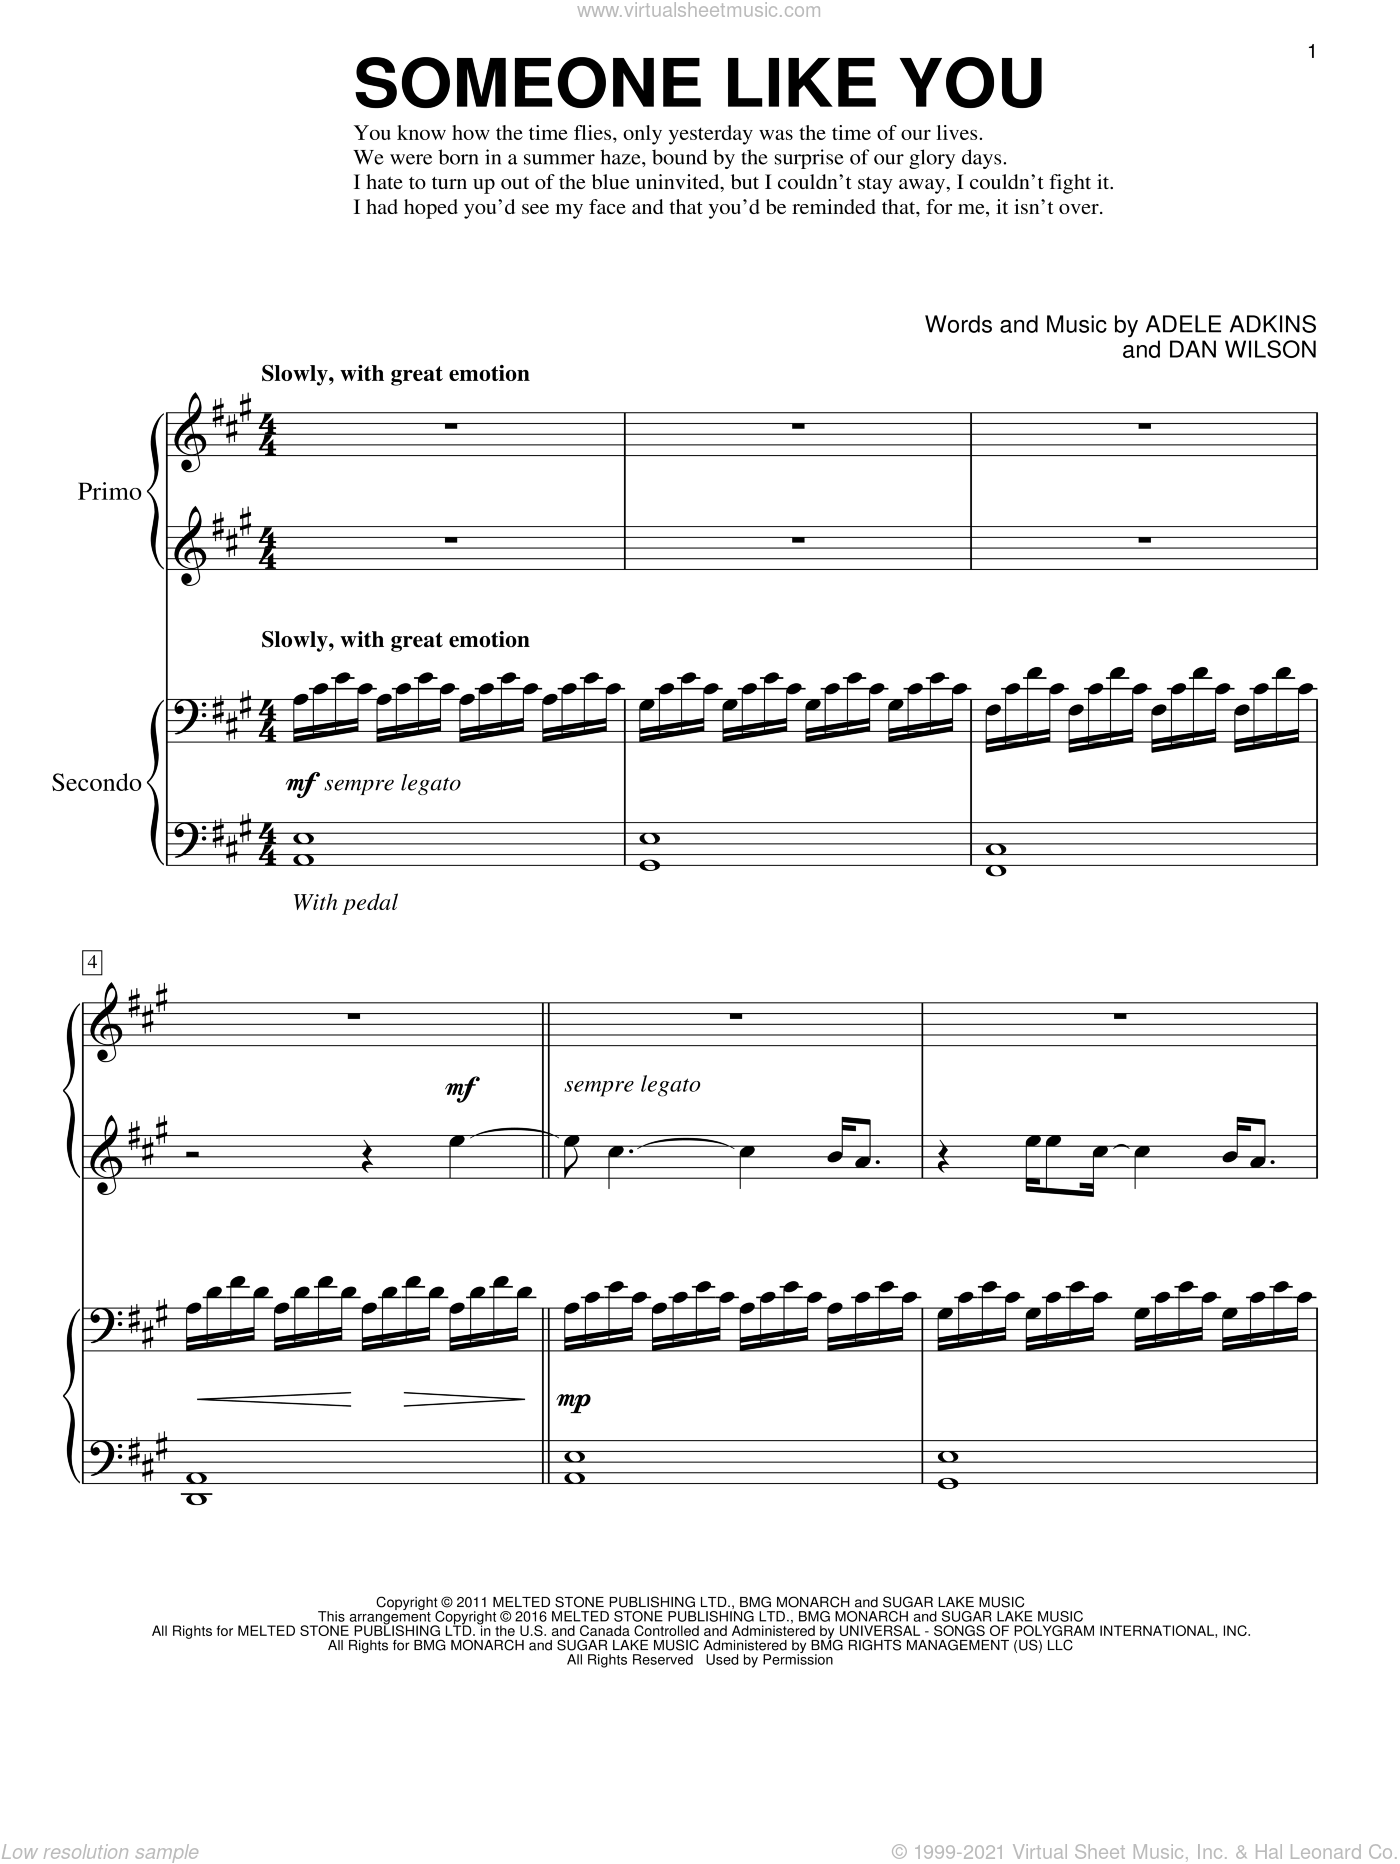 Adele - Someone Like You sheet music for piano four hands [PDF]